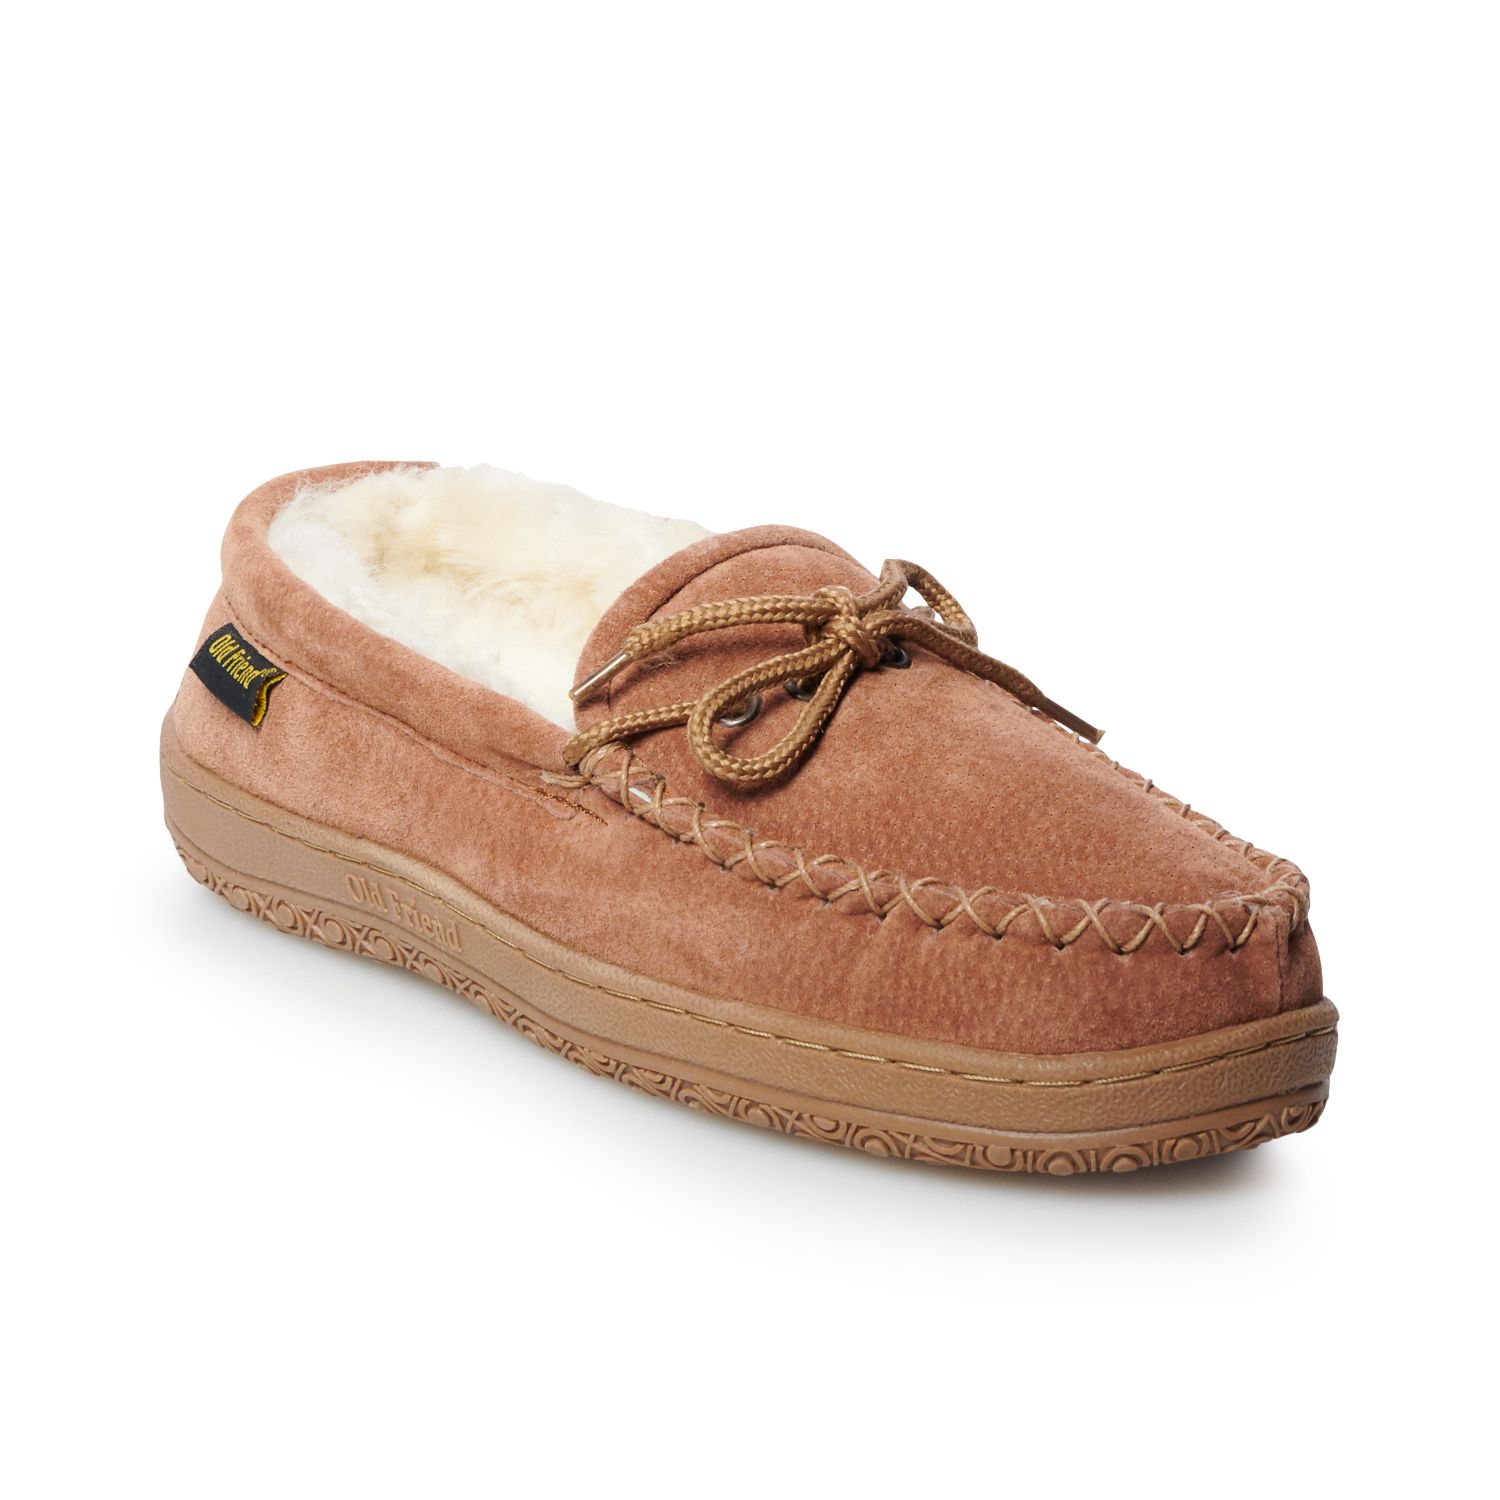 old friend moccasin slippers